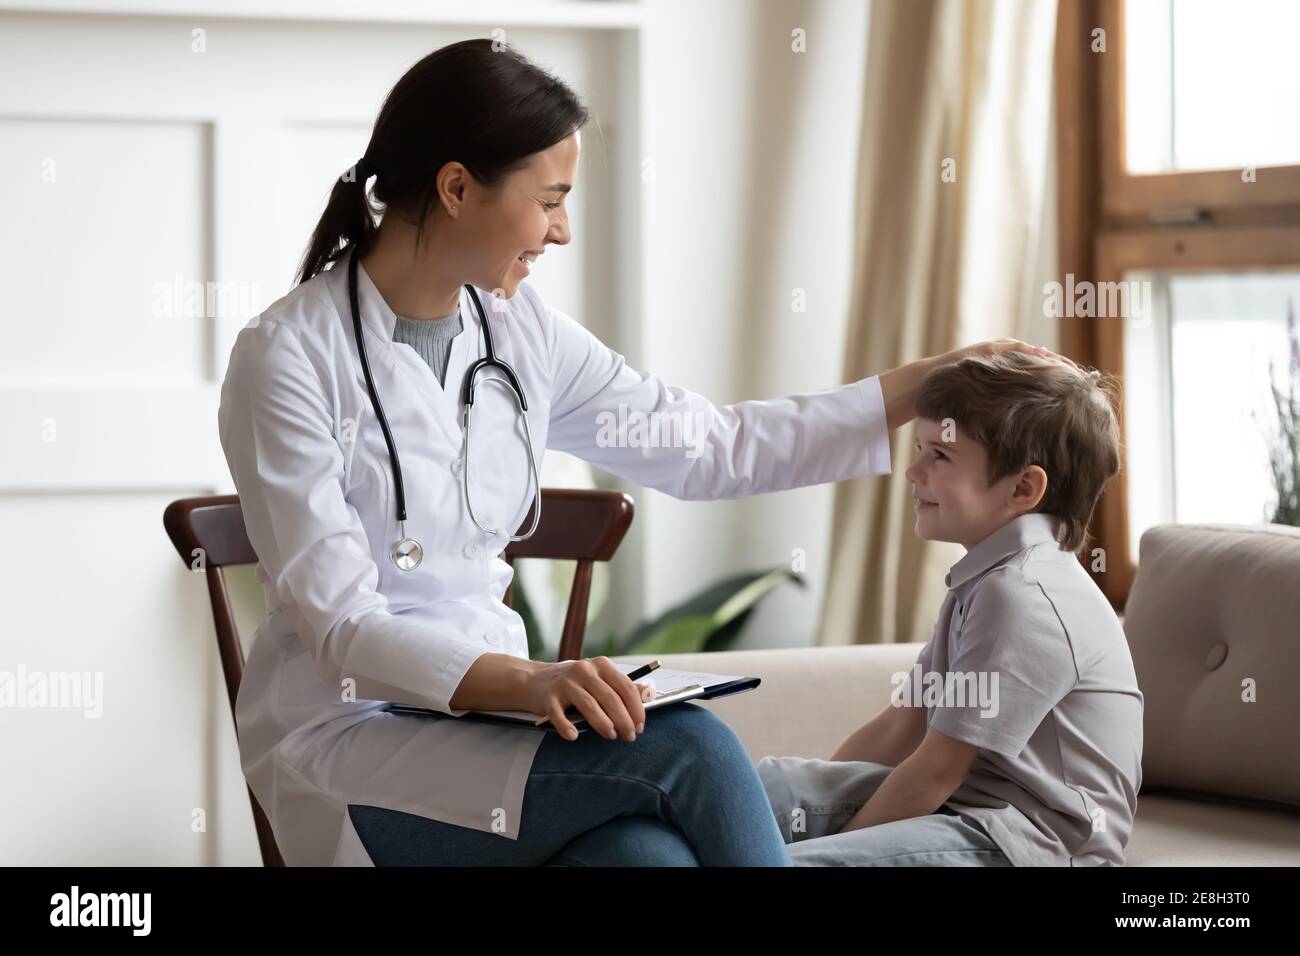 Smiling female doctor cheer small boy patient Stock Photo